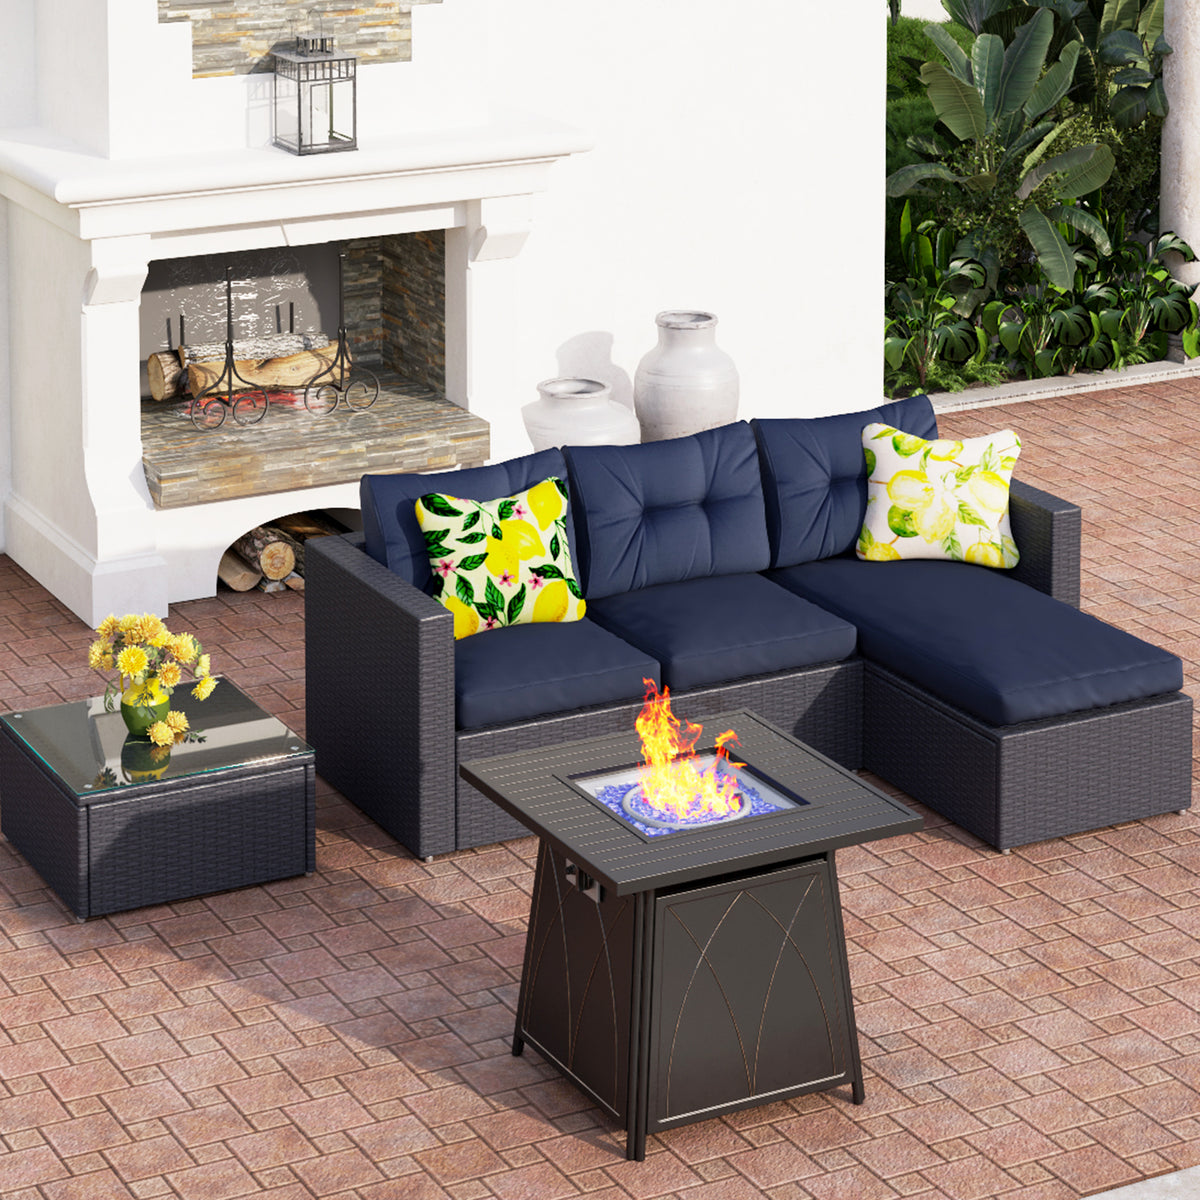 PHI VILLA 4-Piece Rattan Sofa Sectional & 28" Square Fire Pit Table